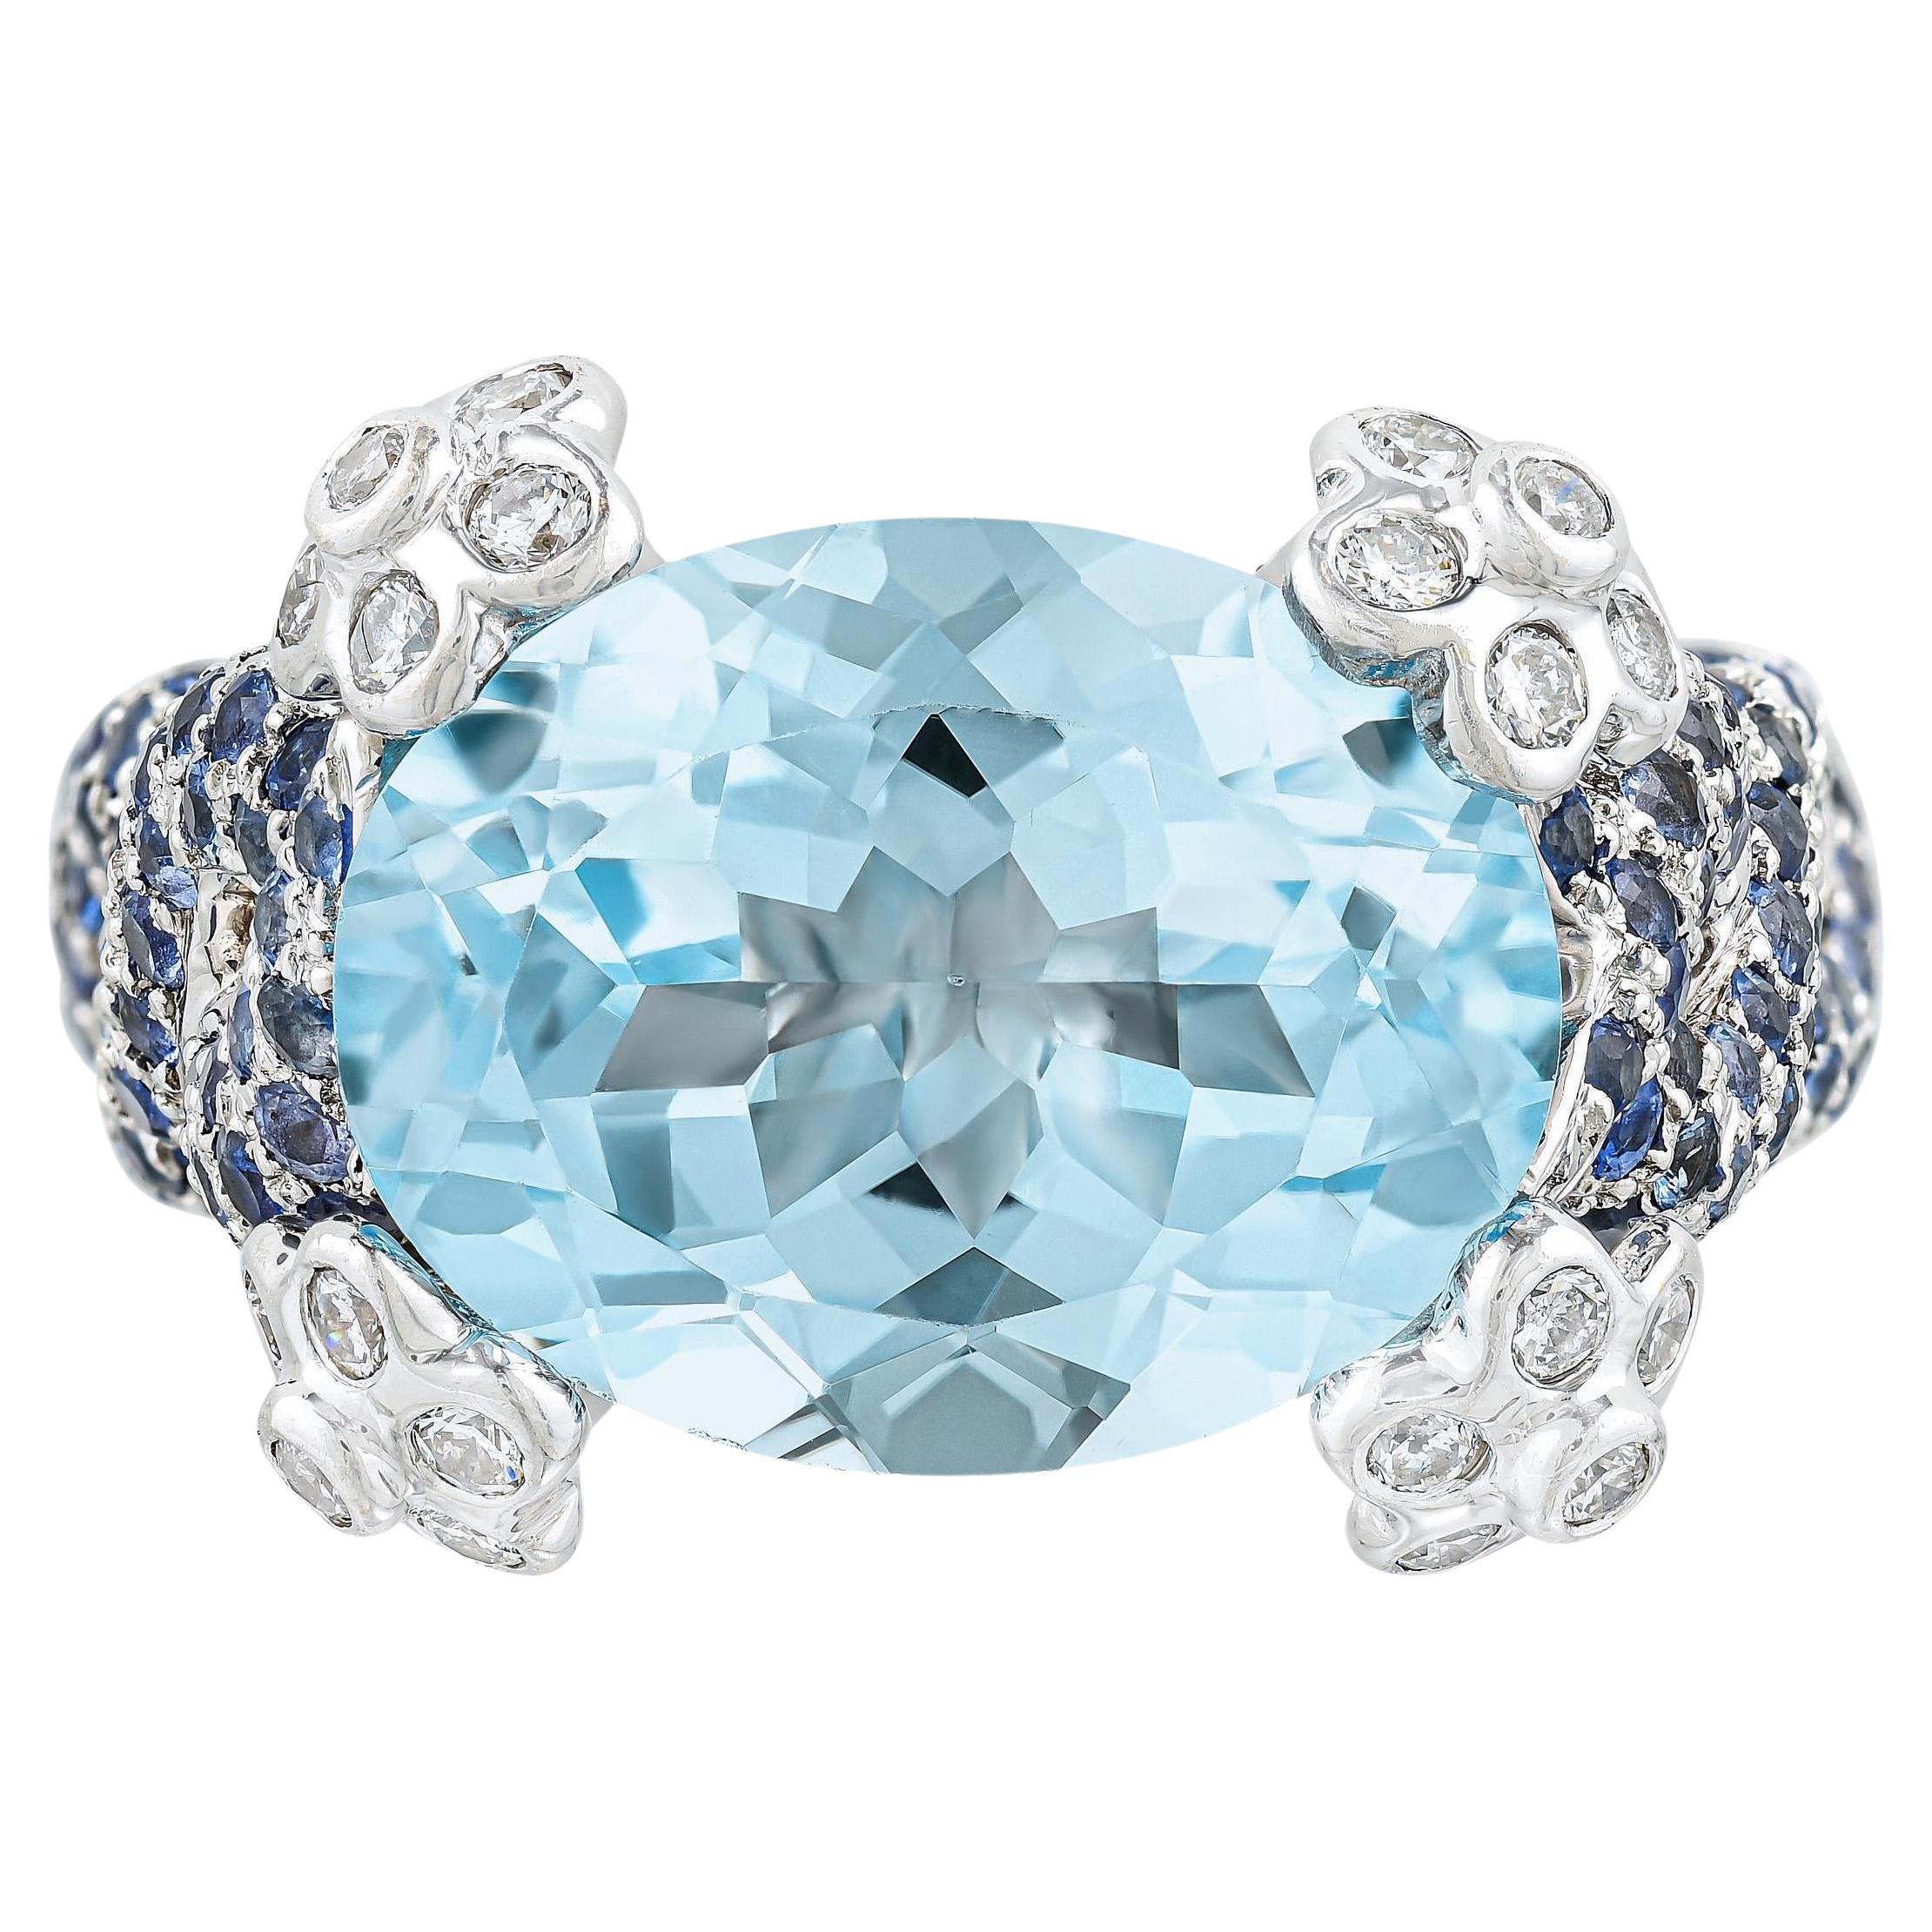 Natural Oval Aquamarine Ring Blue Sapphires and Diamonds Setting 7.79 Carats 18K